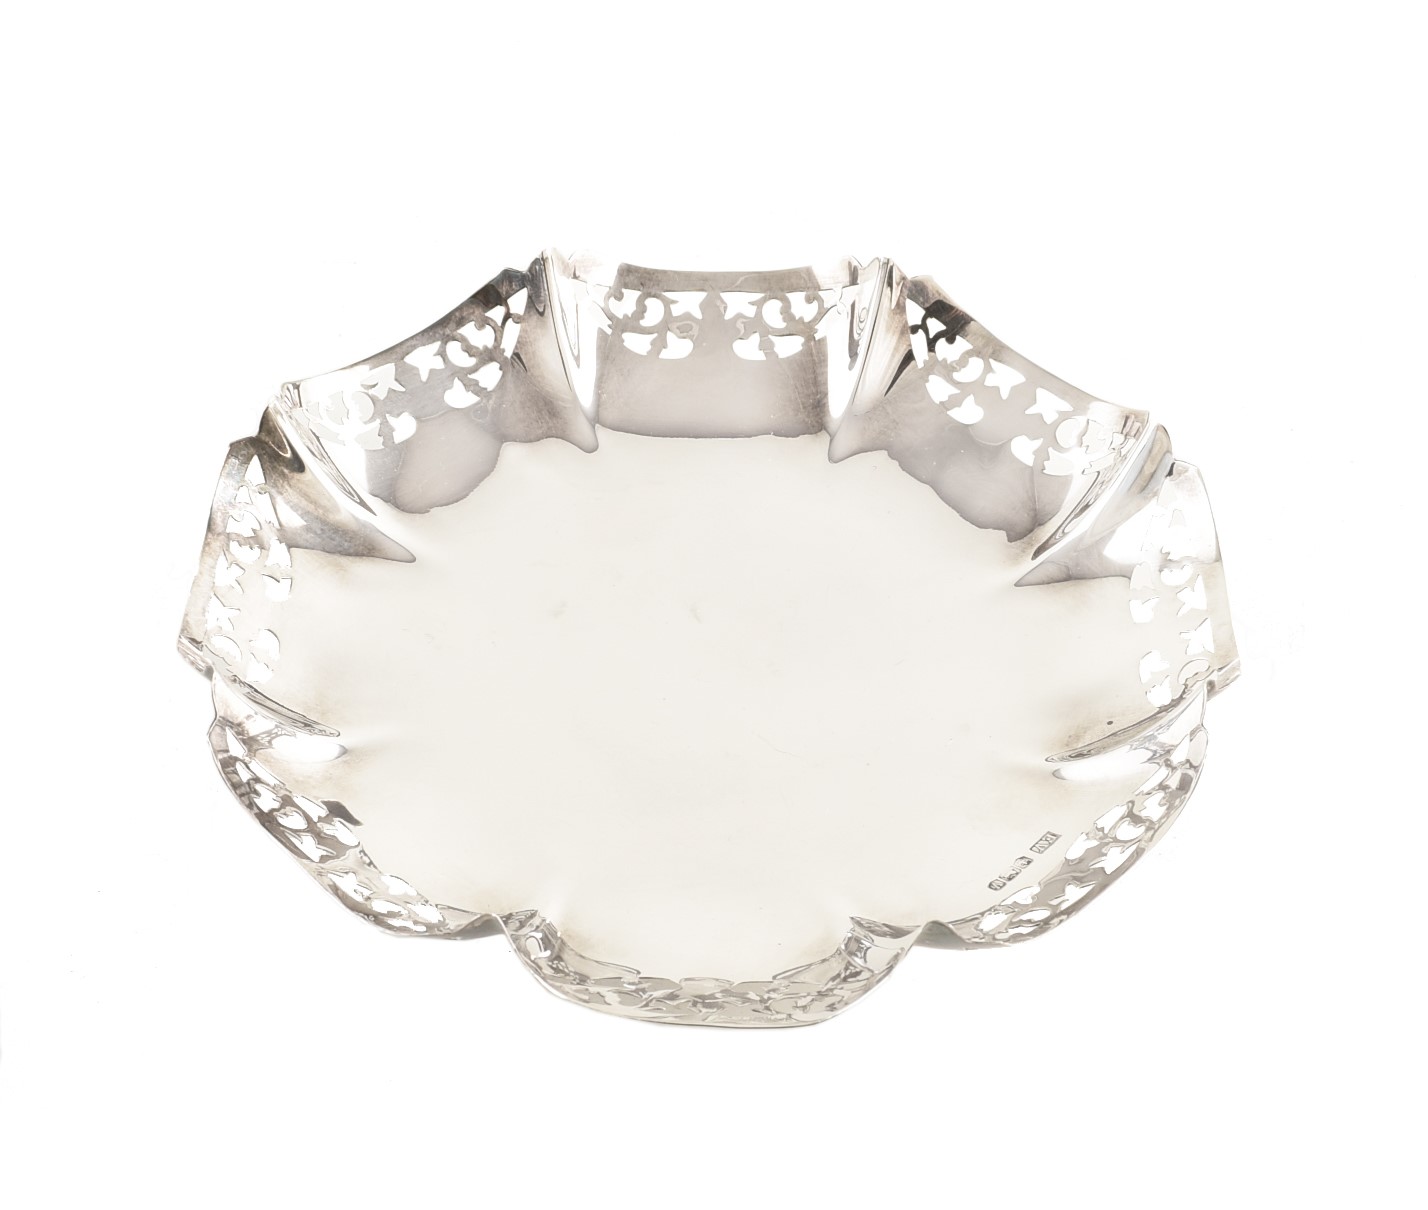 Silver bon bon dish by Emile Viner , plain polished octagonal form with pinched corners and